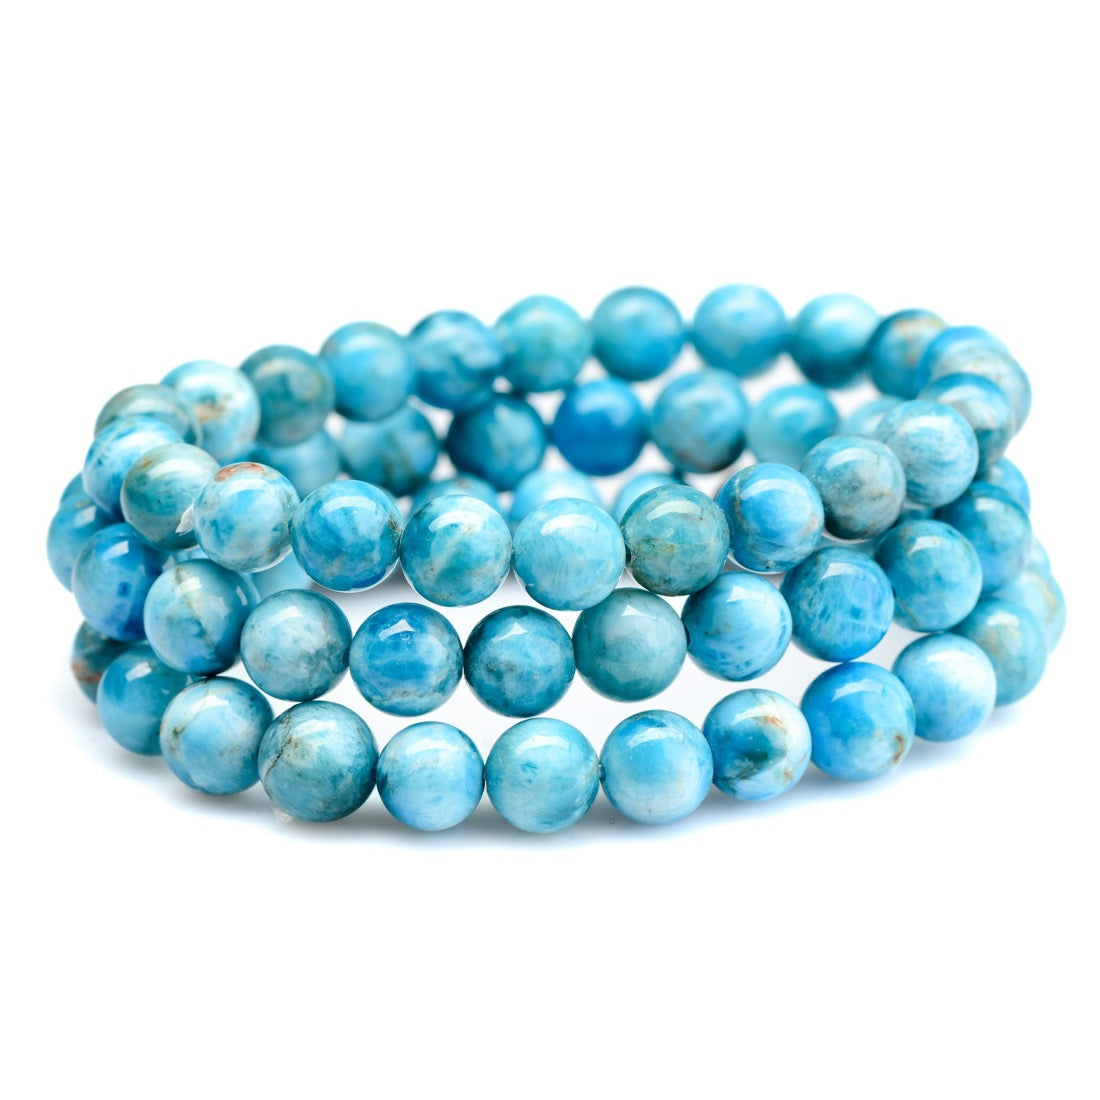 healing crystal jewelry: blue apatite crystal bracelet - Small Beads